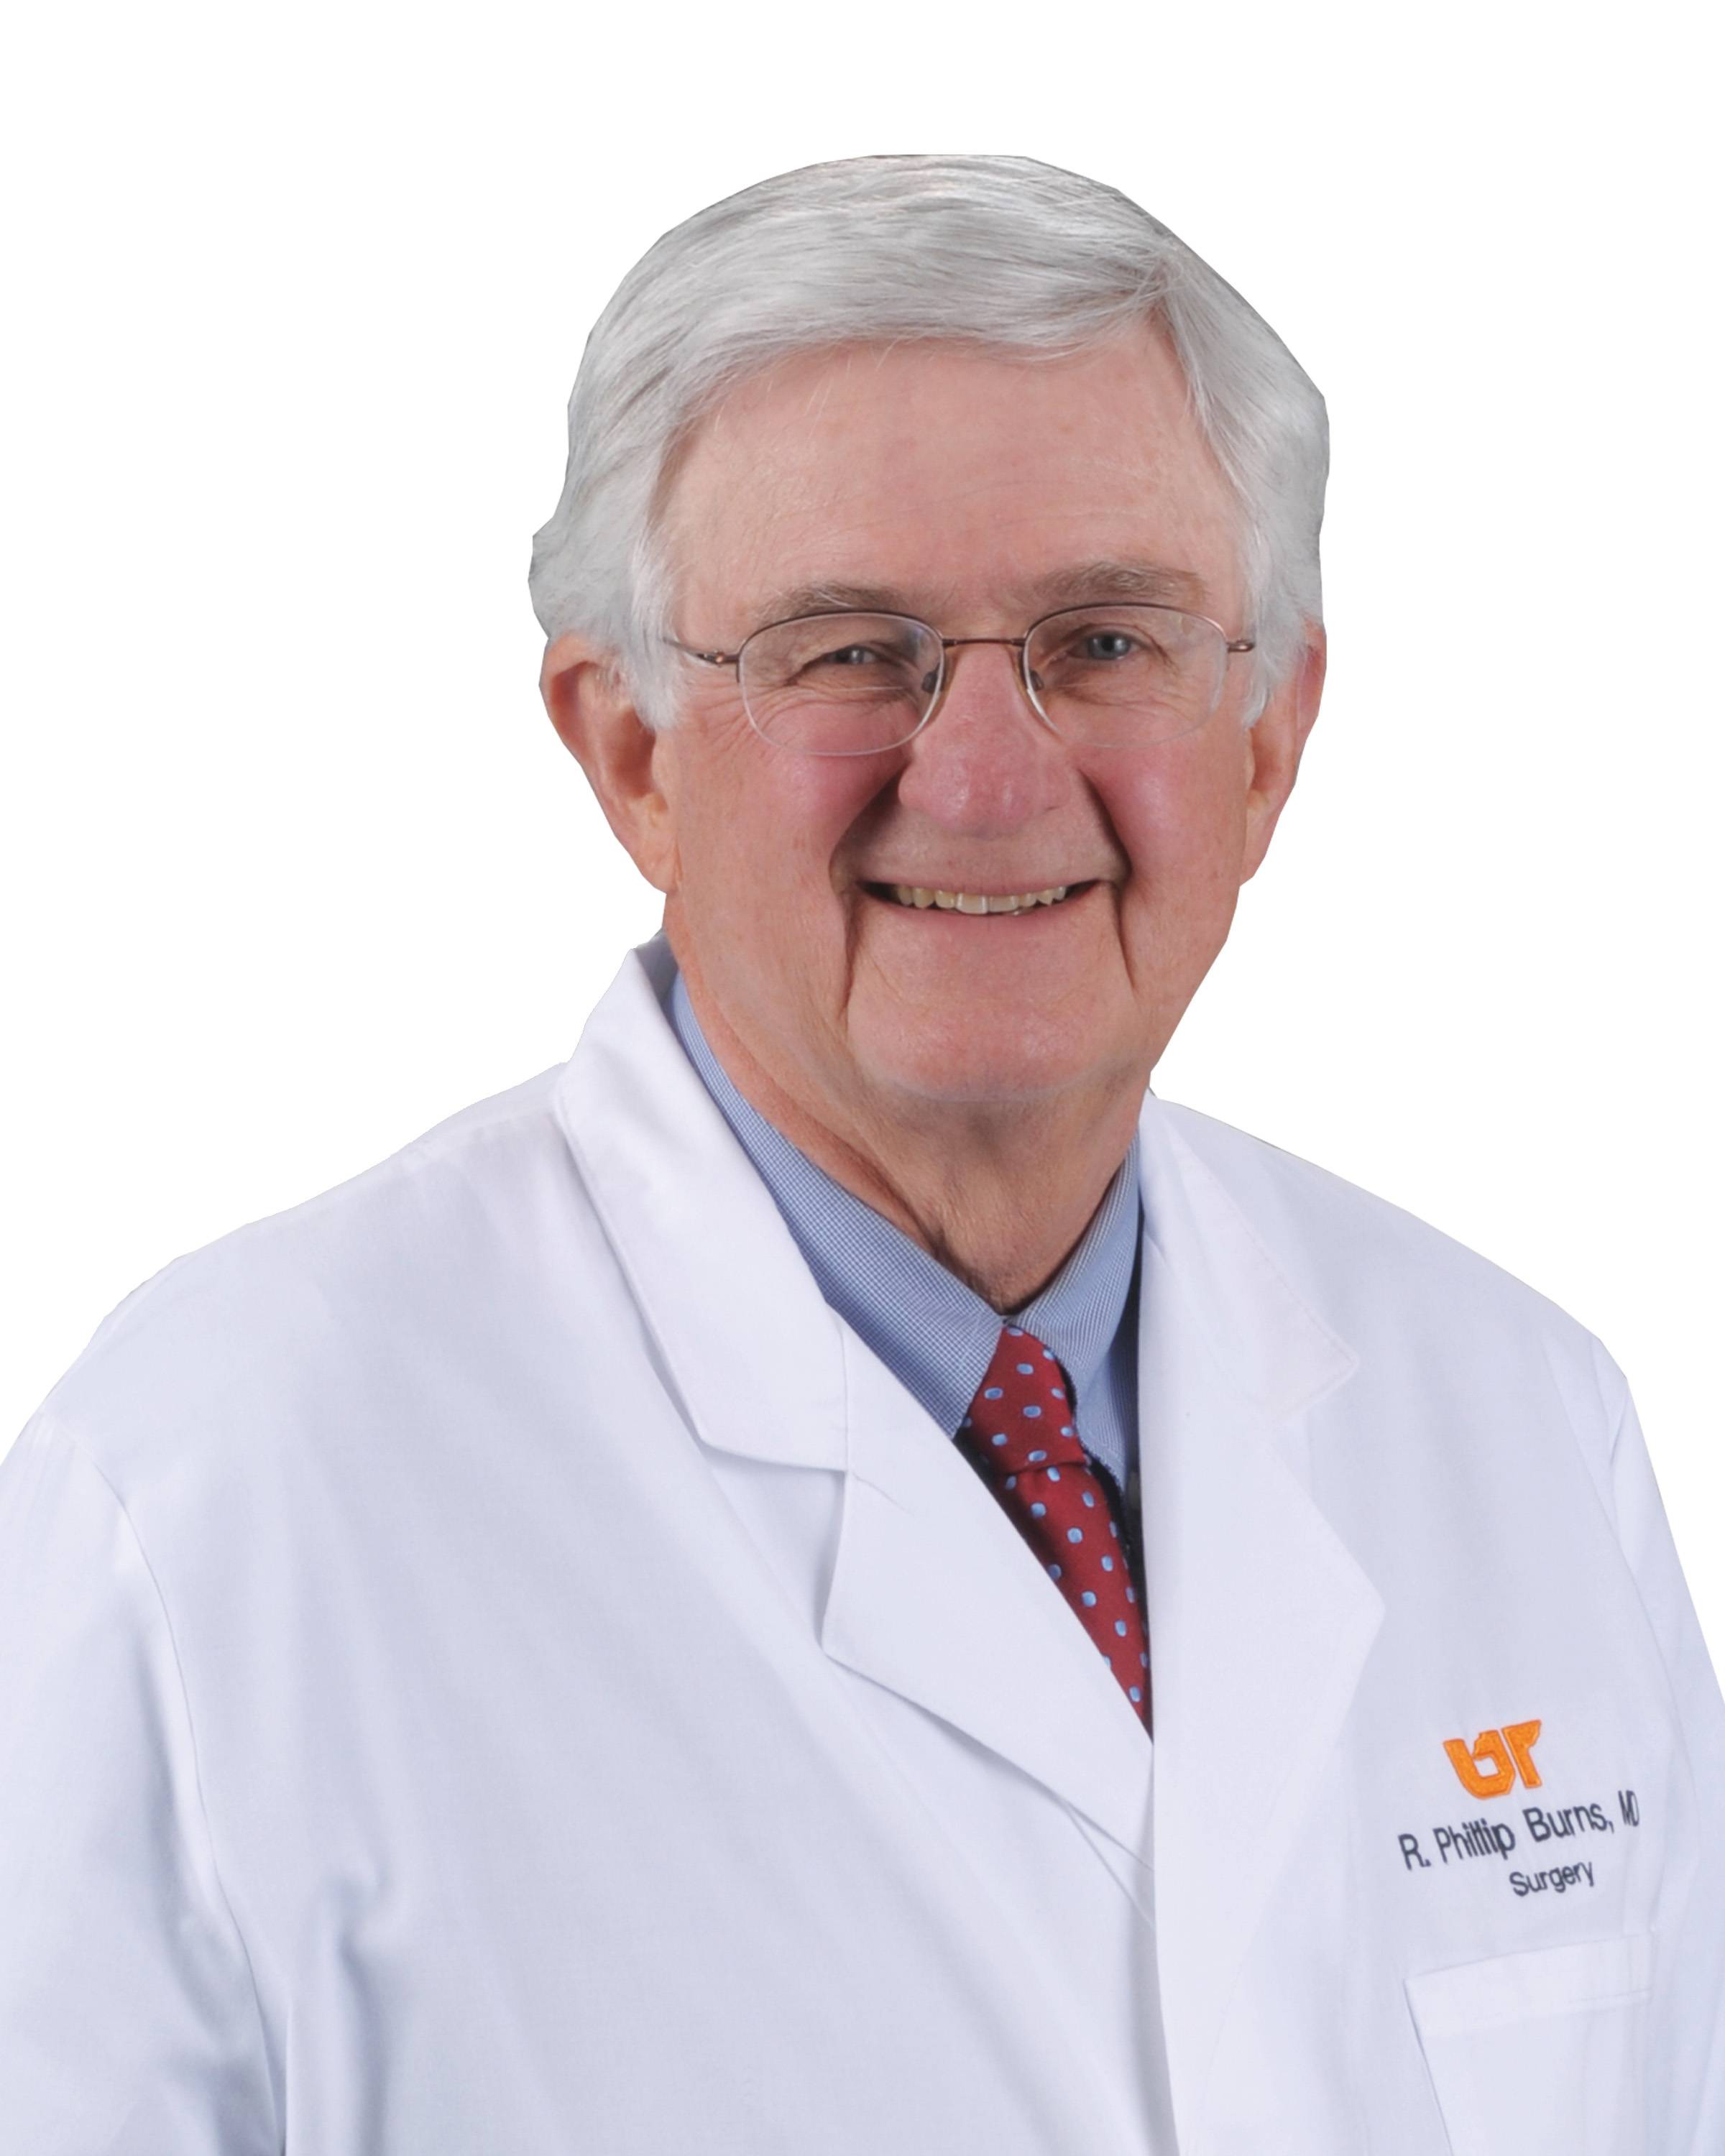 R. Phillip Burns, MD, Vice Chair